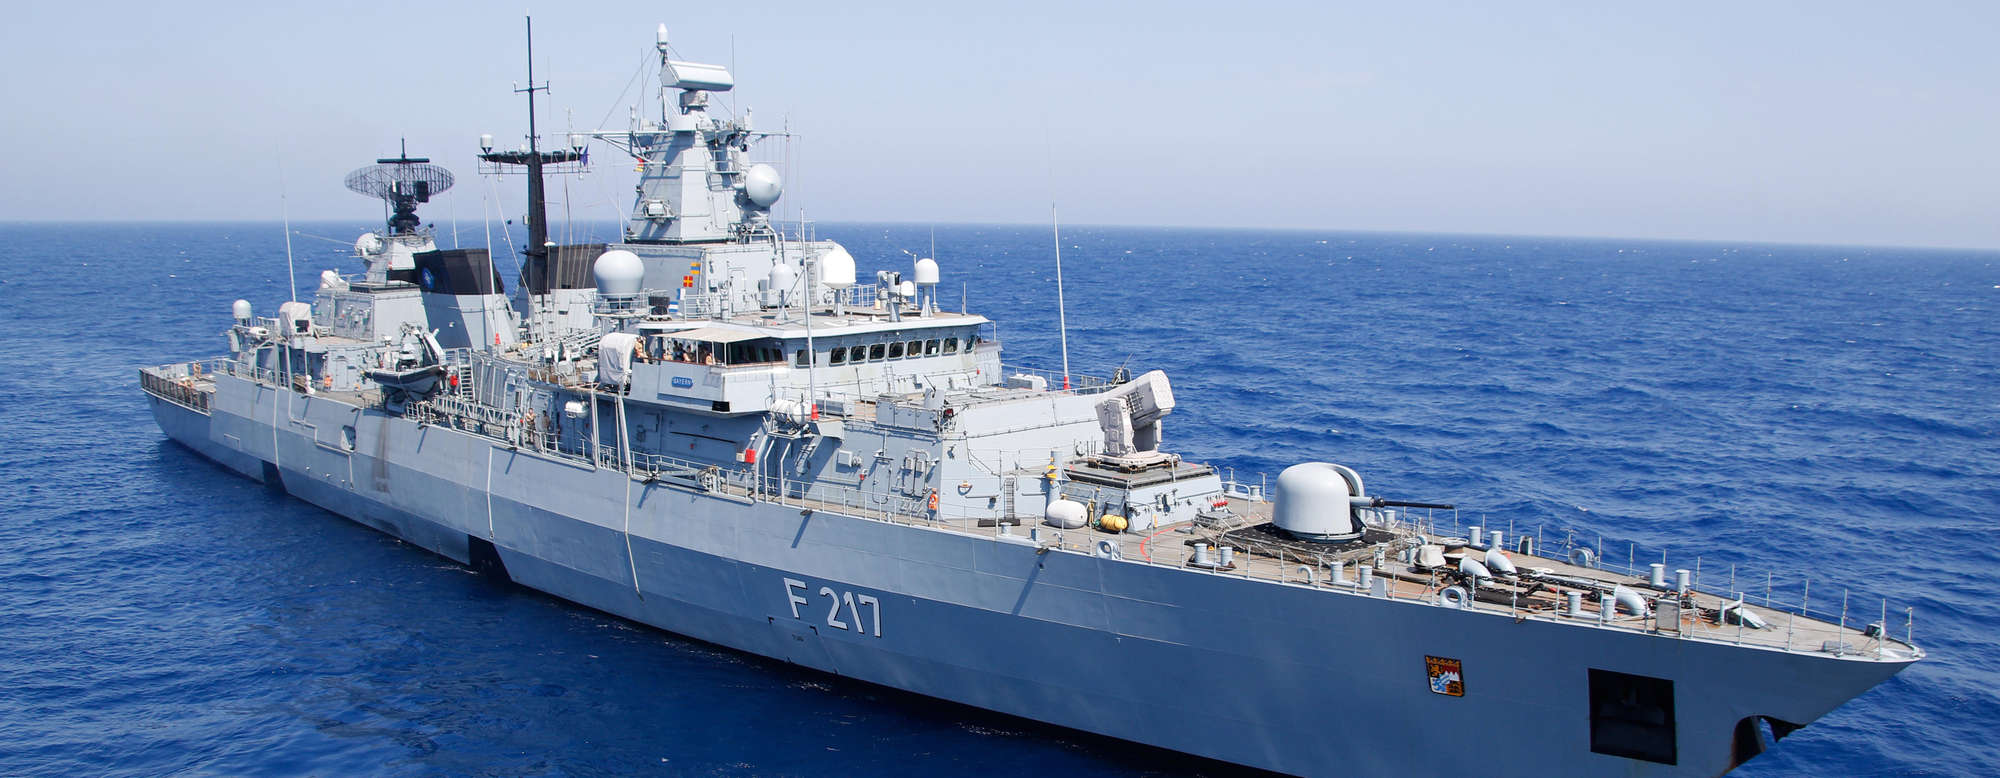 German Navy Departs For First South China Sea Patrol In Decades